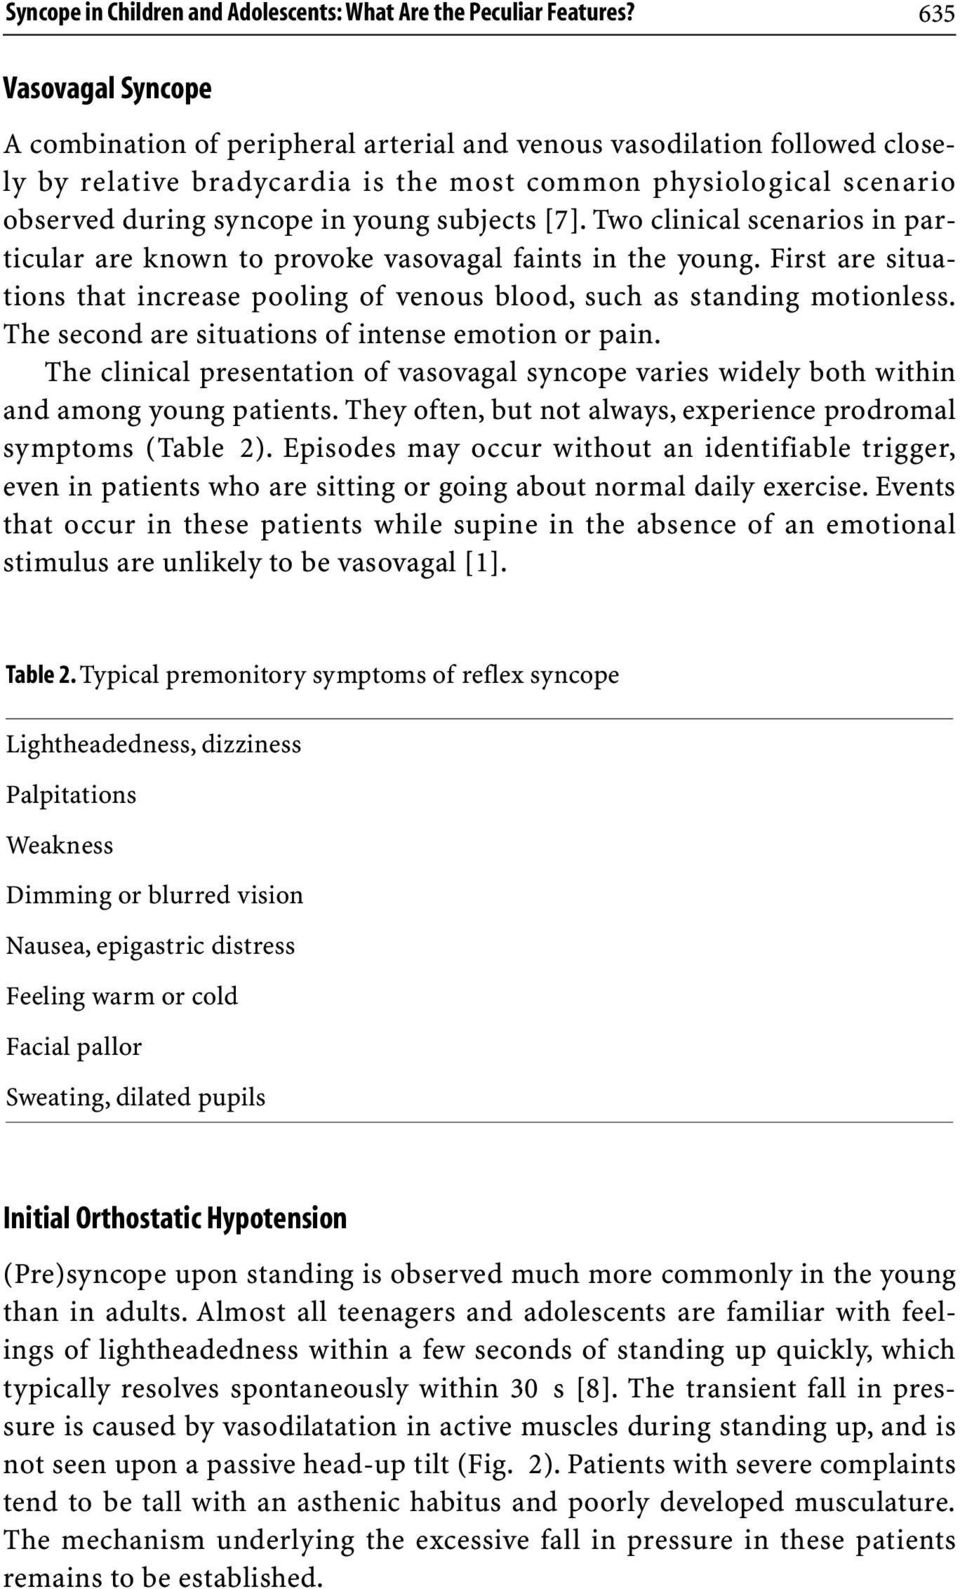 subjects [7]. Two clinical scenarios in particular are known to provoke vasovagal faints in the young. First are situations that increase pooling of venous blood, such as standing motionless.